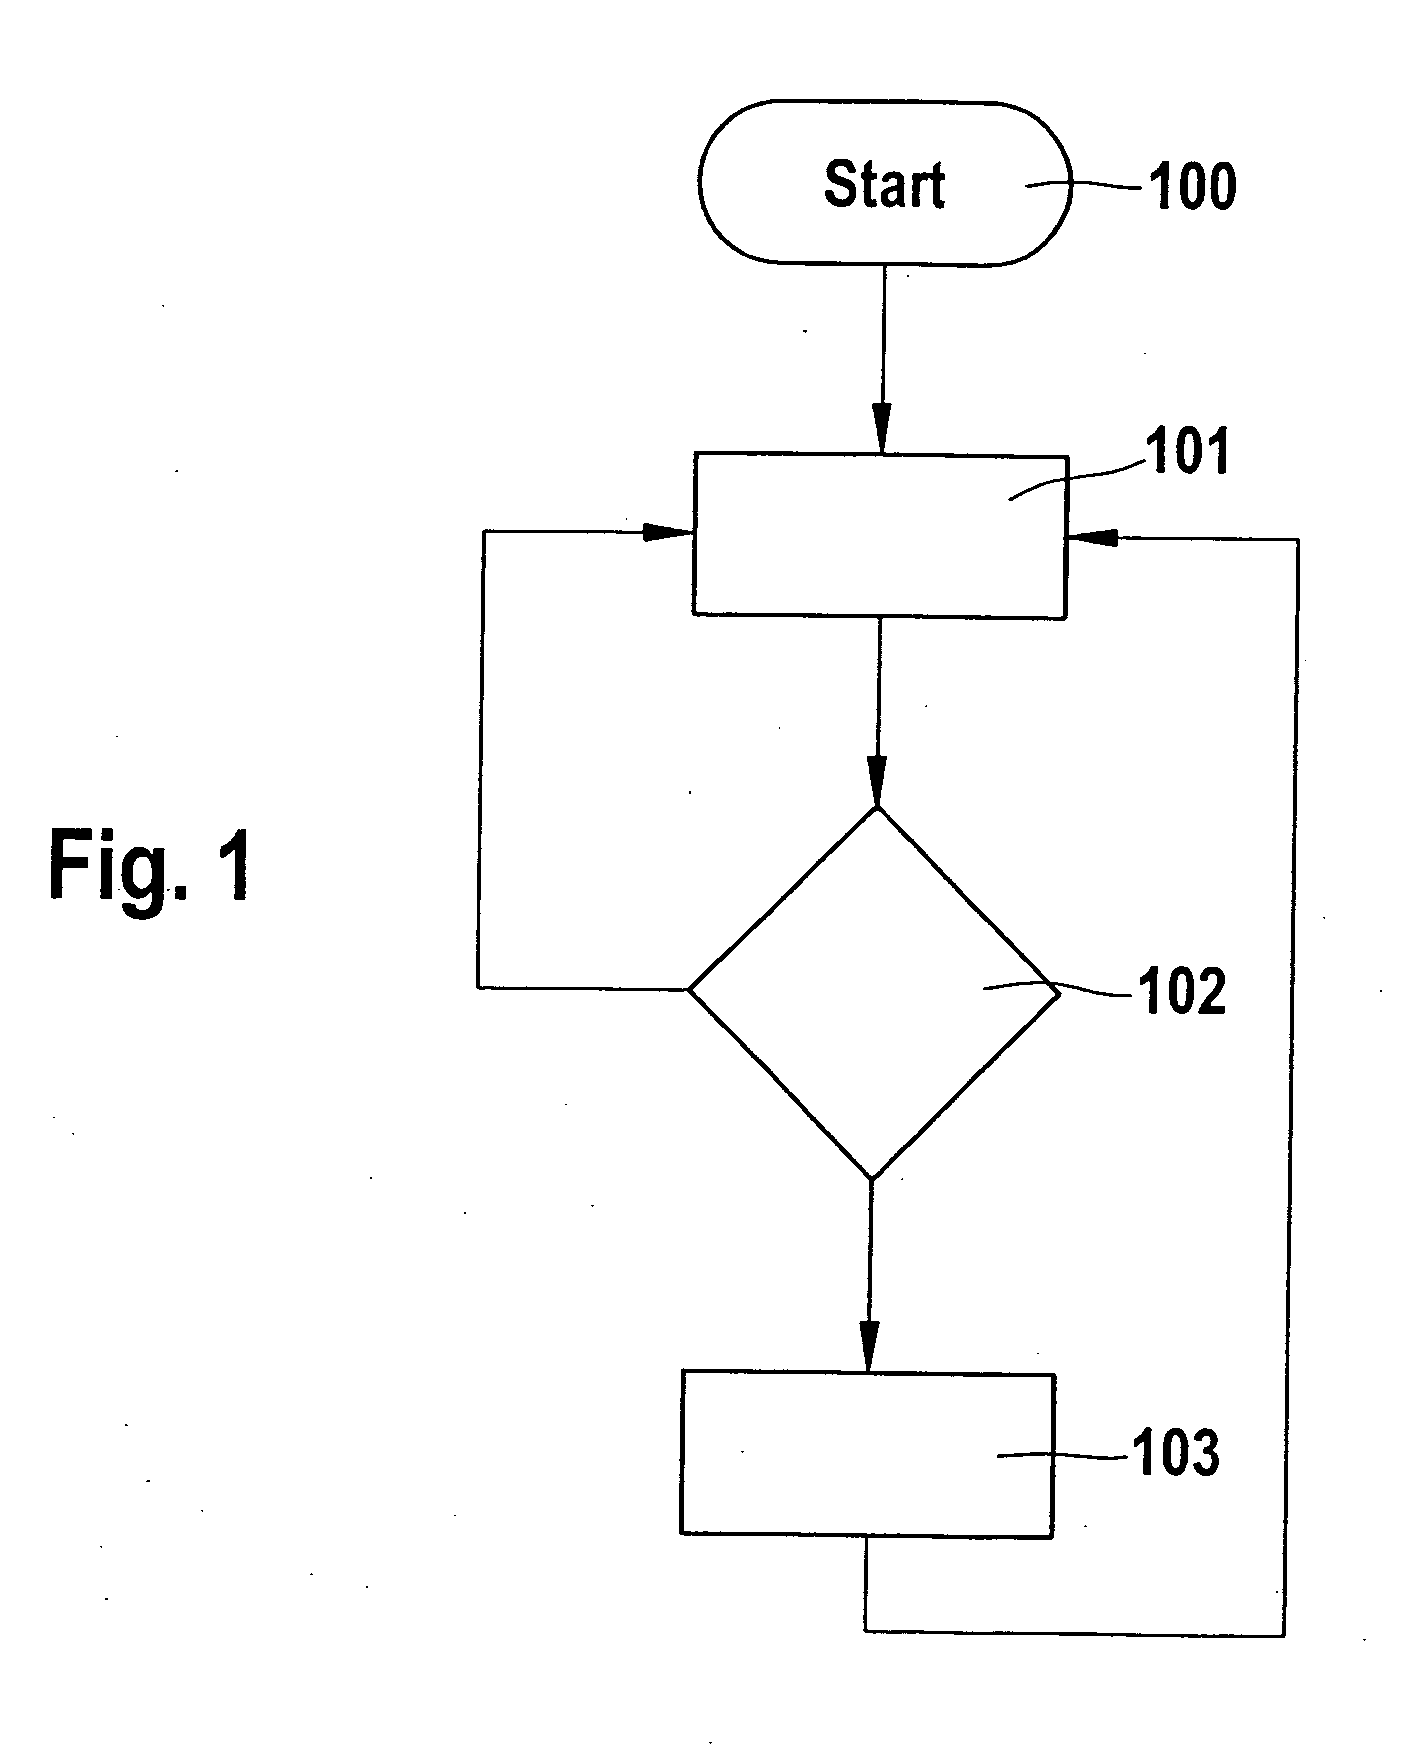 Method and device for detecting and stabilizing a fishtailing trailer using wheel forces